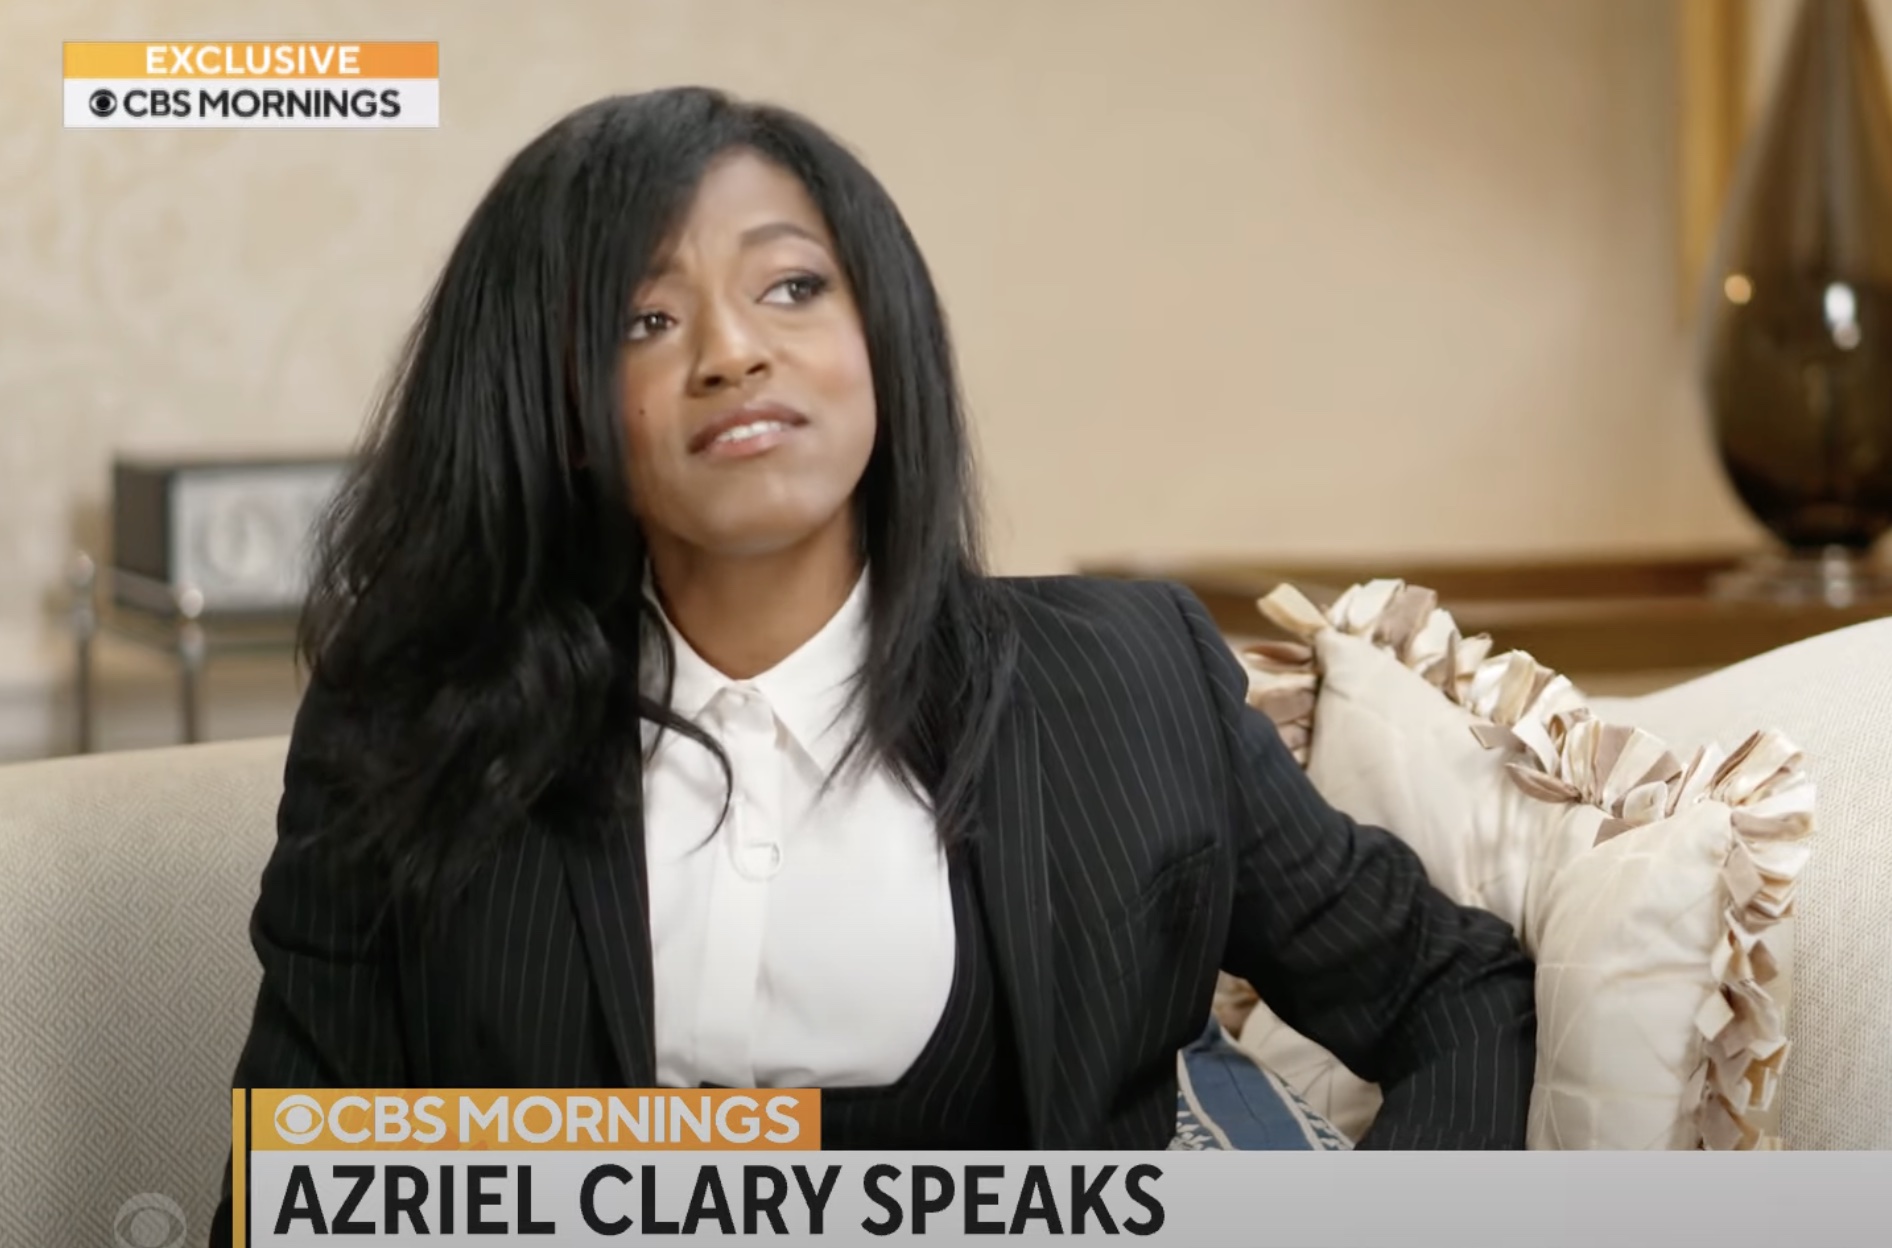 R. Kelly Survivor Azriel Clary Sits Down With Gayle King for Interview